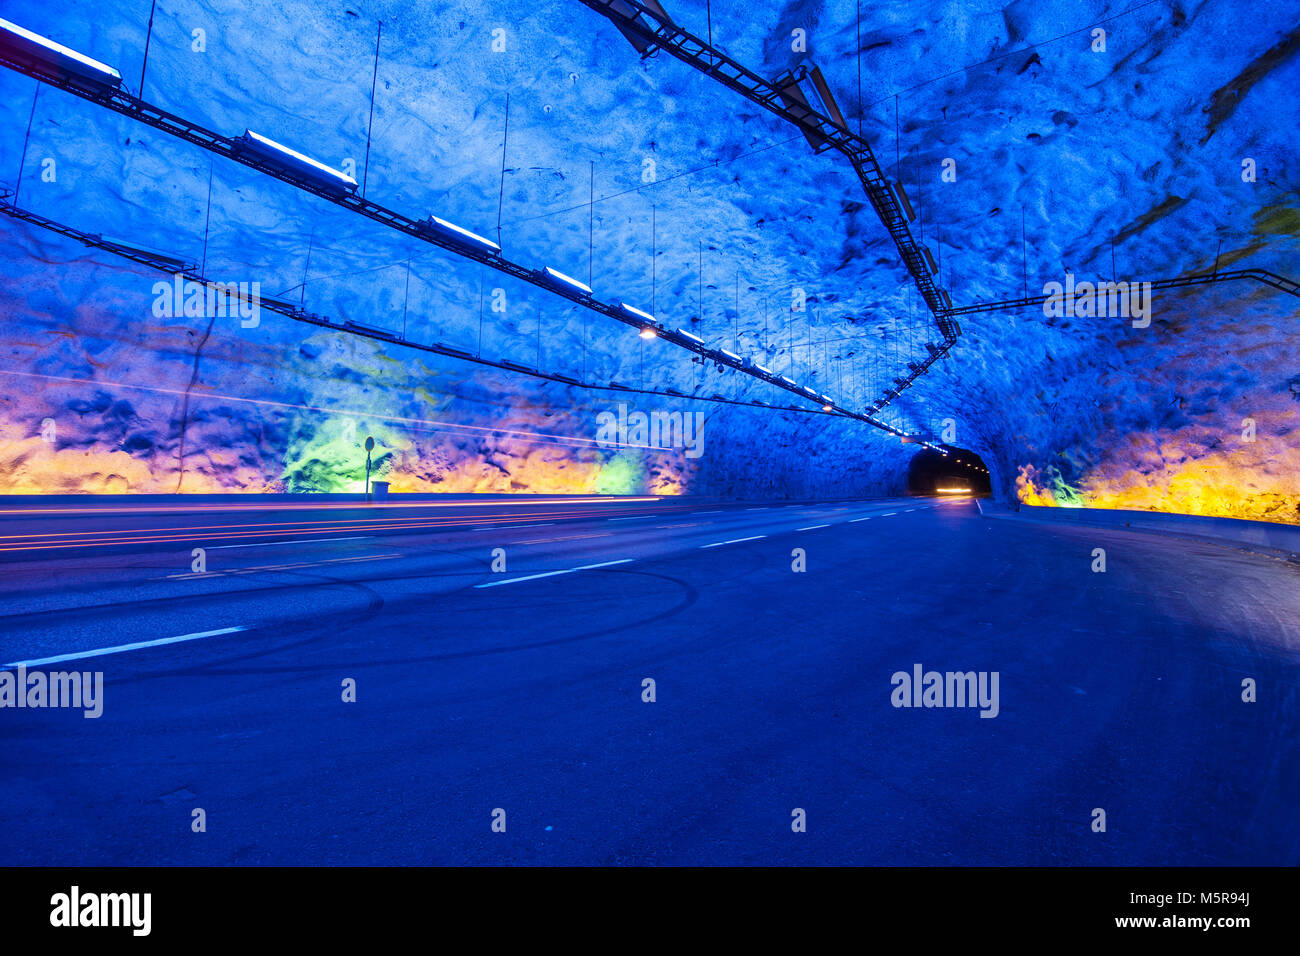 Laerdal Tunnel in Norway, the longest road tunnel in the world since 2000. Stock Photo